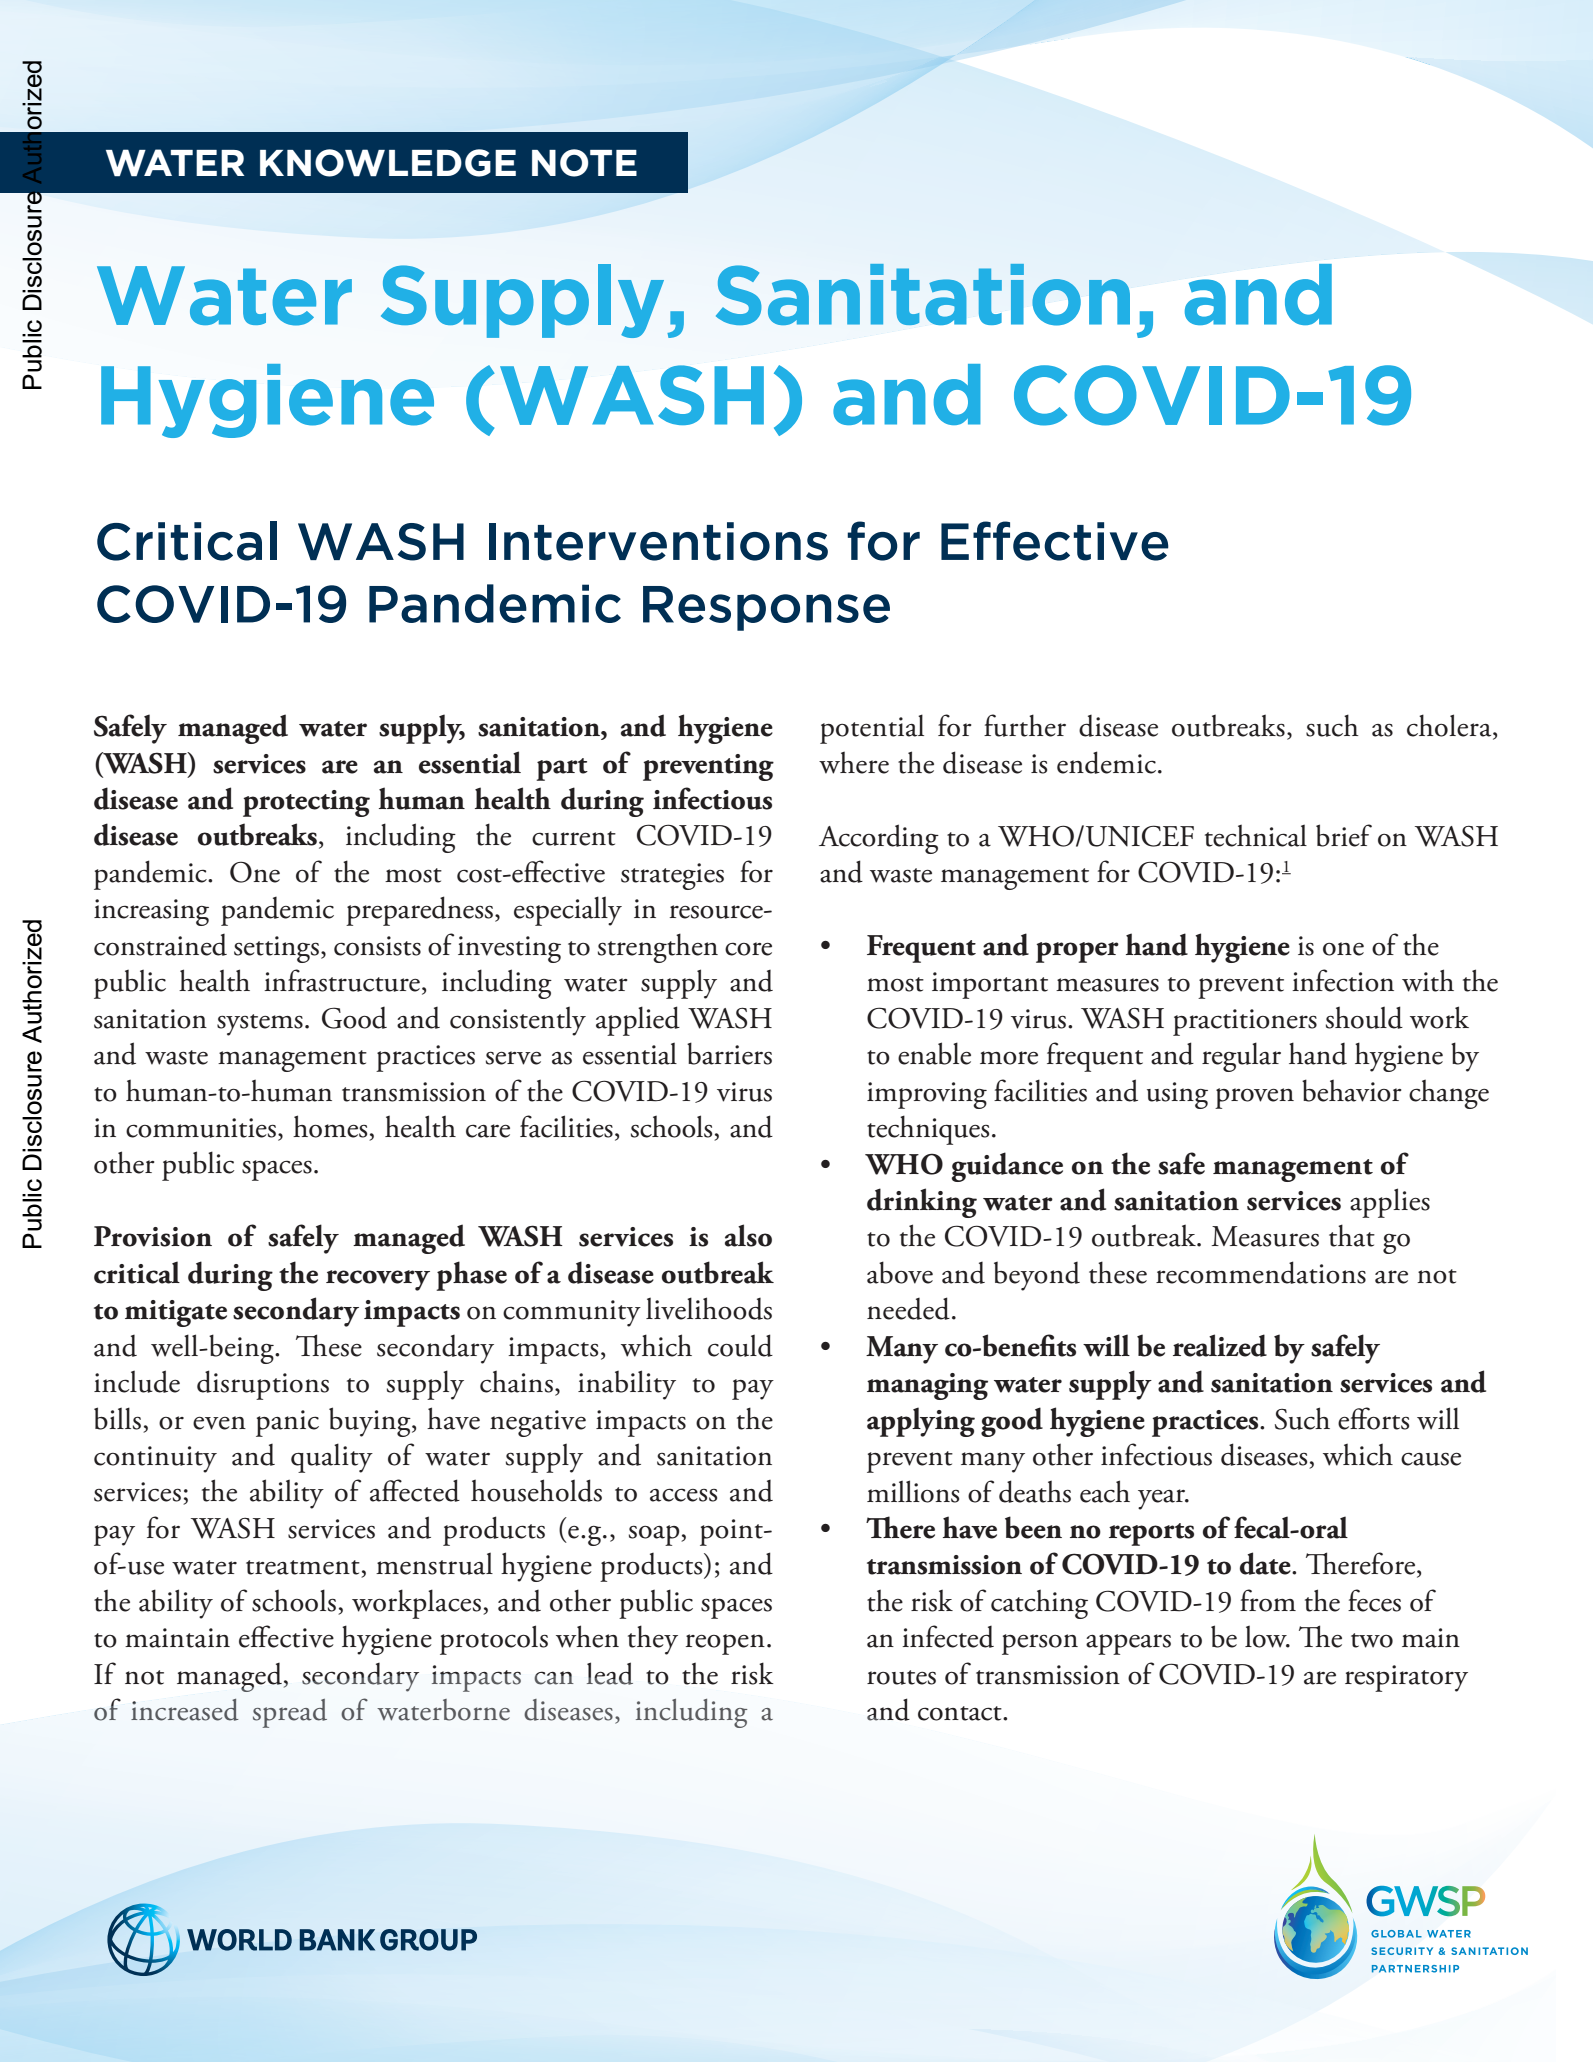 English_WASH-and-COVID-19-Critical-WASH-Interventions-for-Effective-COVID-19-Pandemic-Response